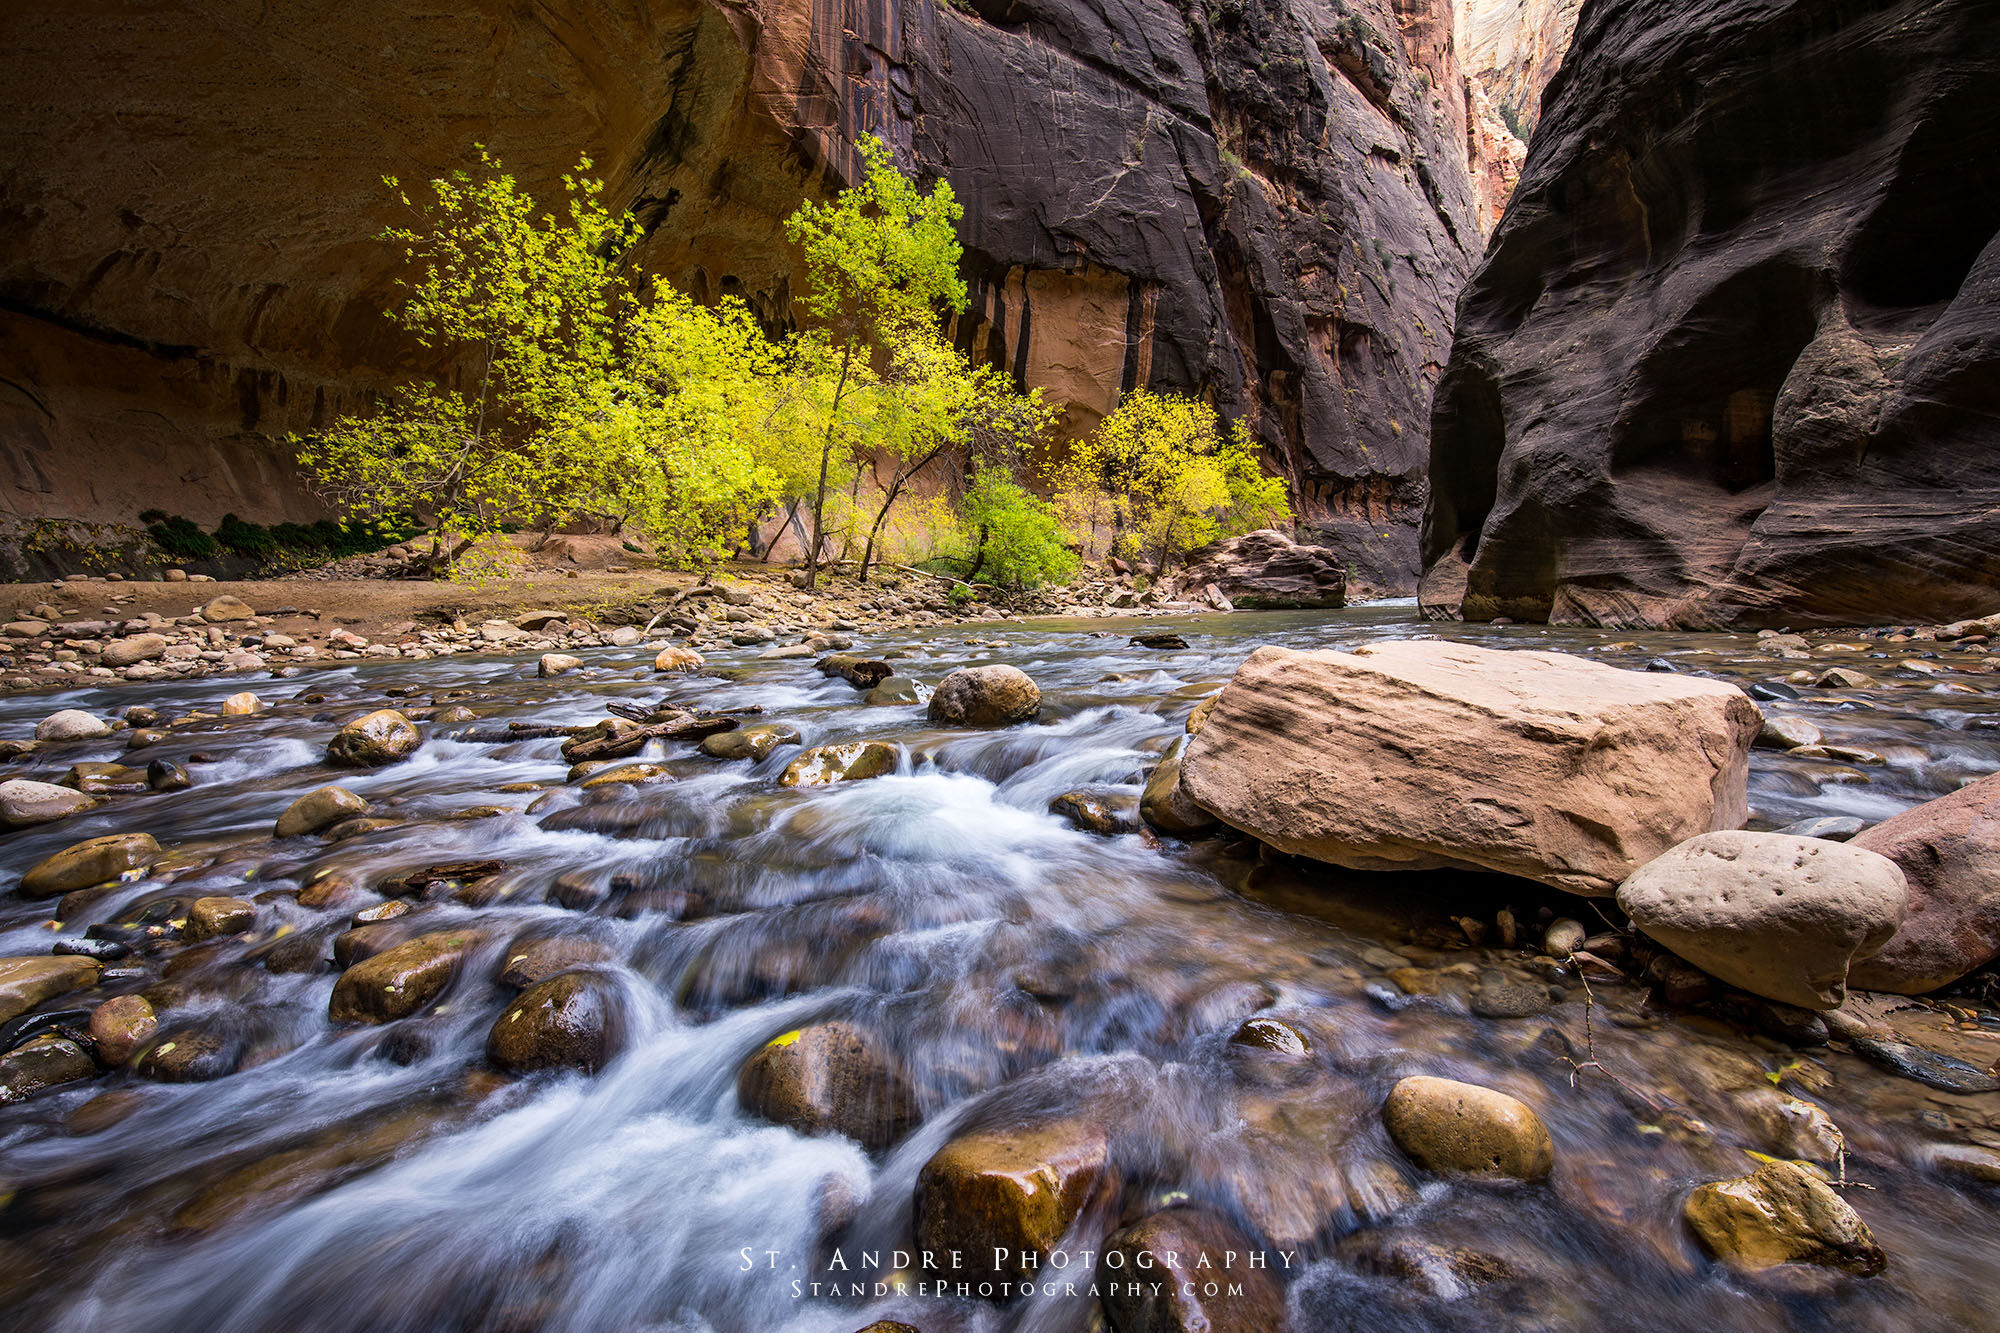 Zion Narrows with the virgin river cascading over rocks. Trees in full fall colors can be seen in the background. 